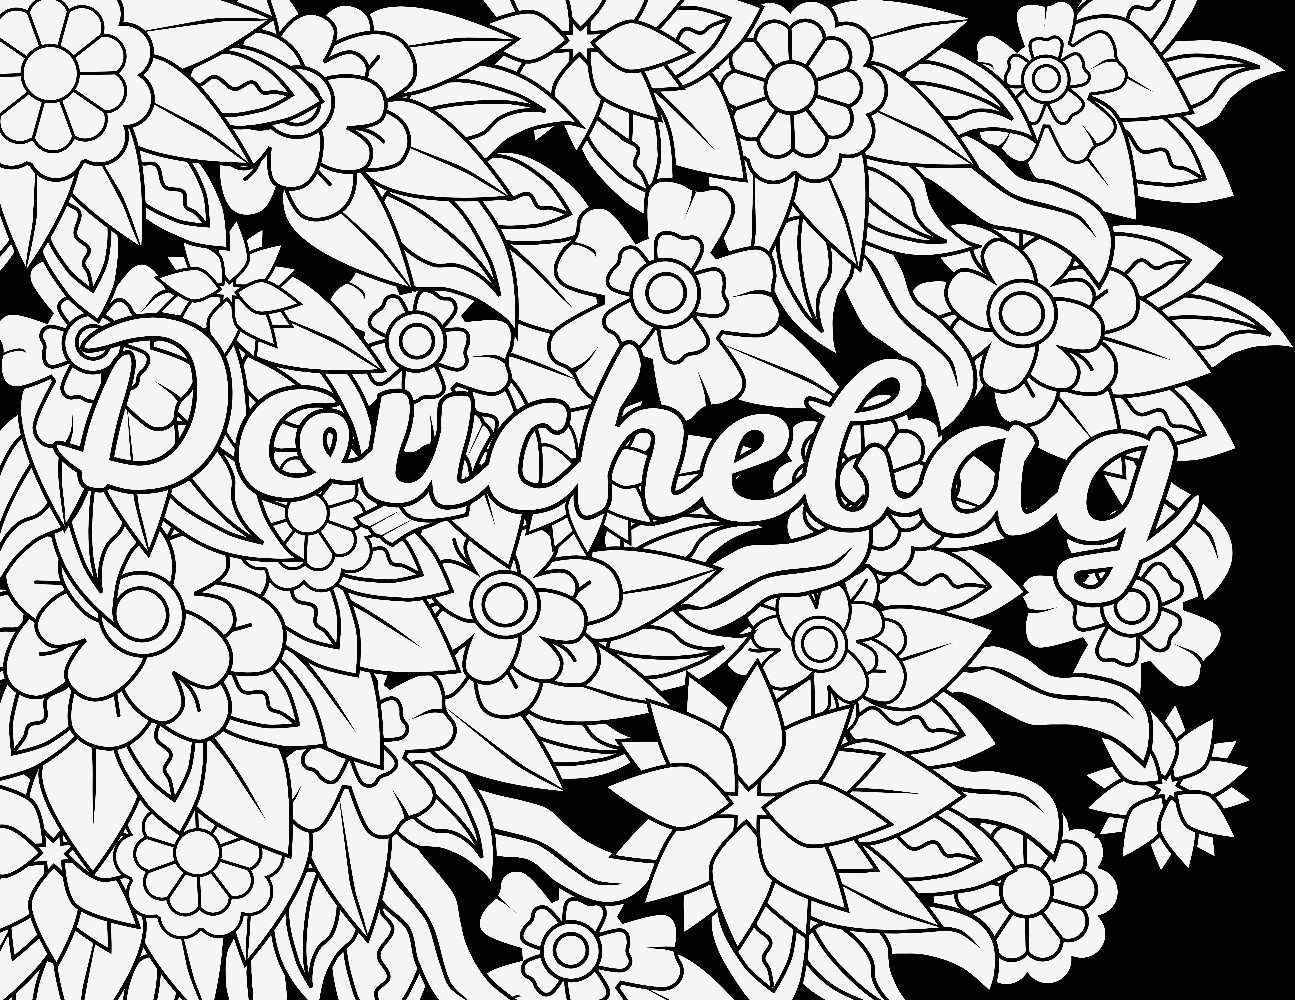 Spanish Christmas Coloring Pages Henna Design Coloring Pages Inspirational Easy Adult Coloring Pages